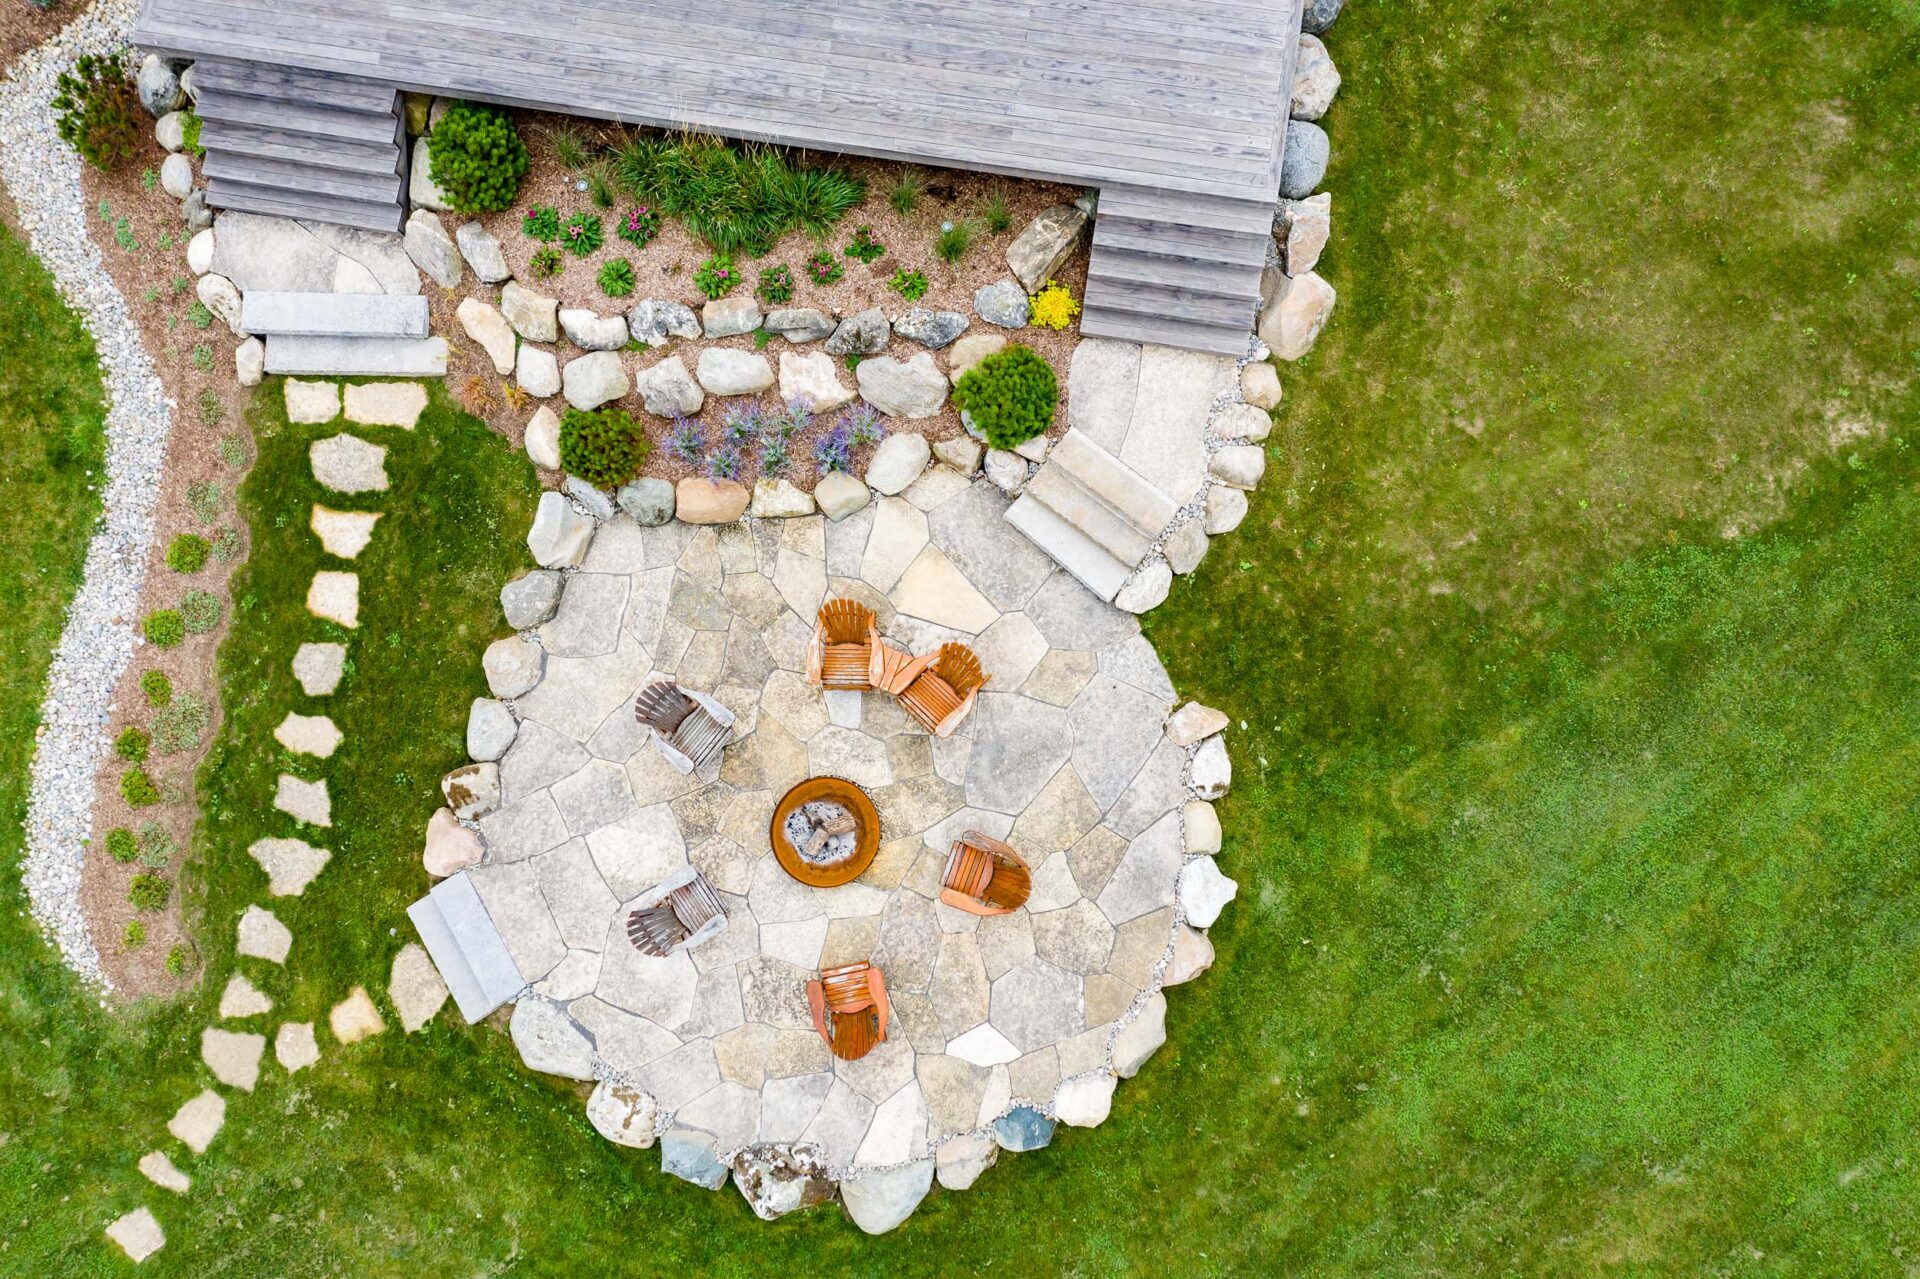 Aerial view of a backyard with a circular stone patio, fire pit, wooden chairs, a landscaped garden, and a wooden structure nearby.